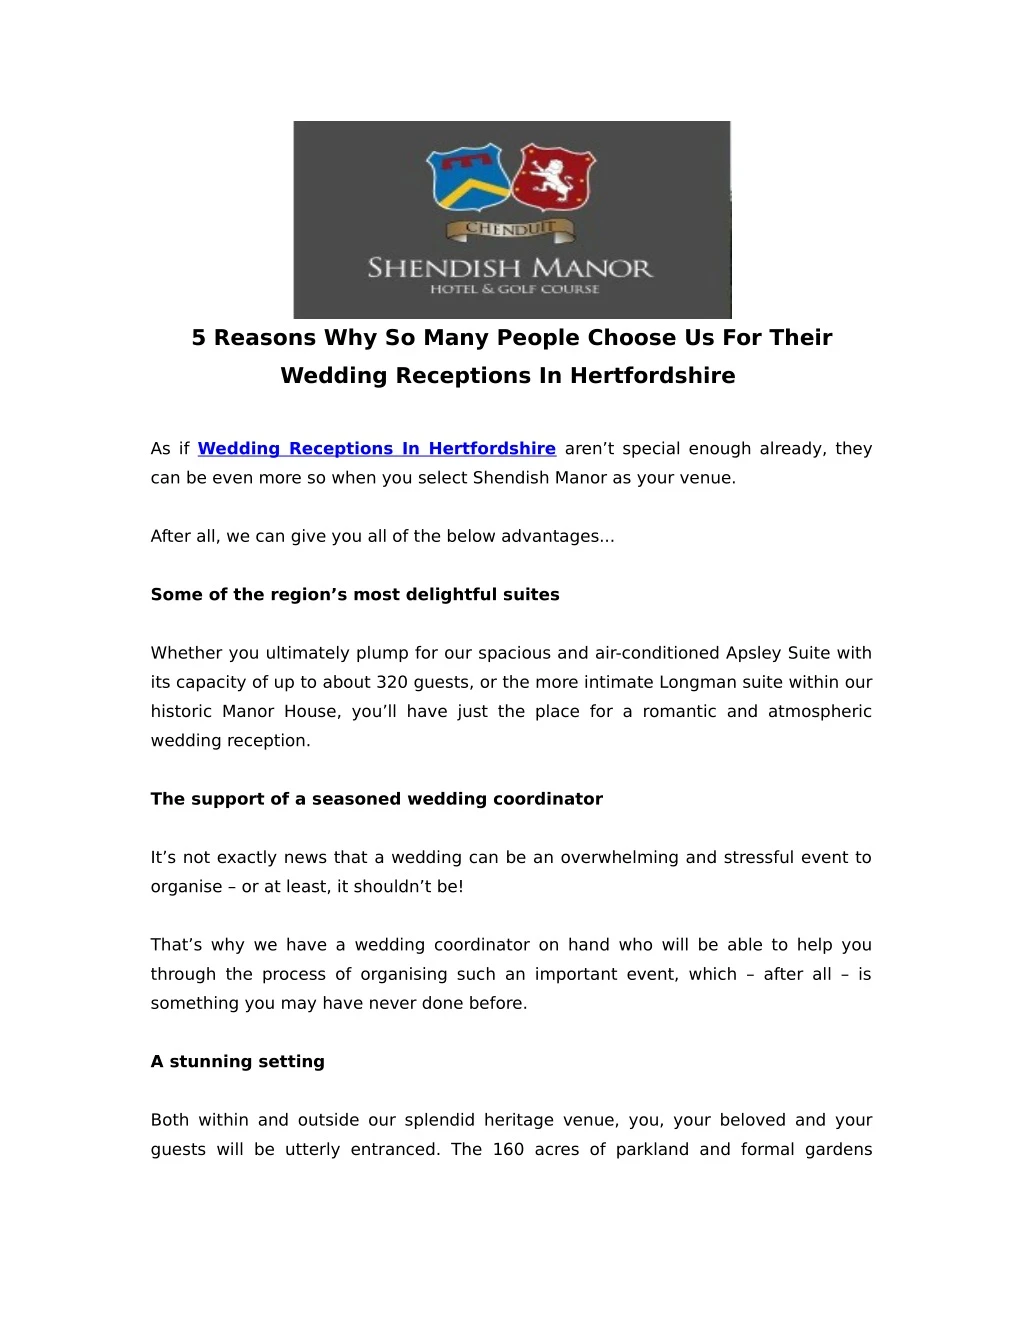 5 reasons why so many people choose us for their